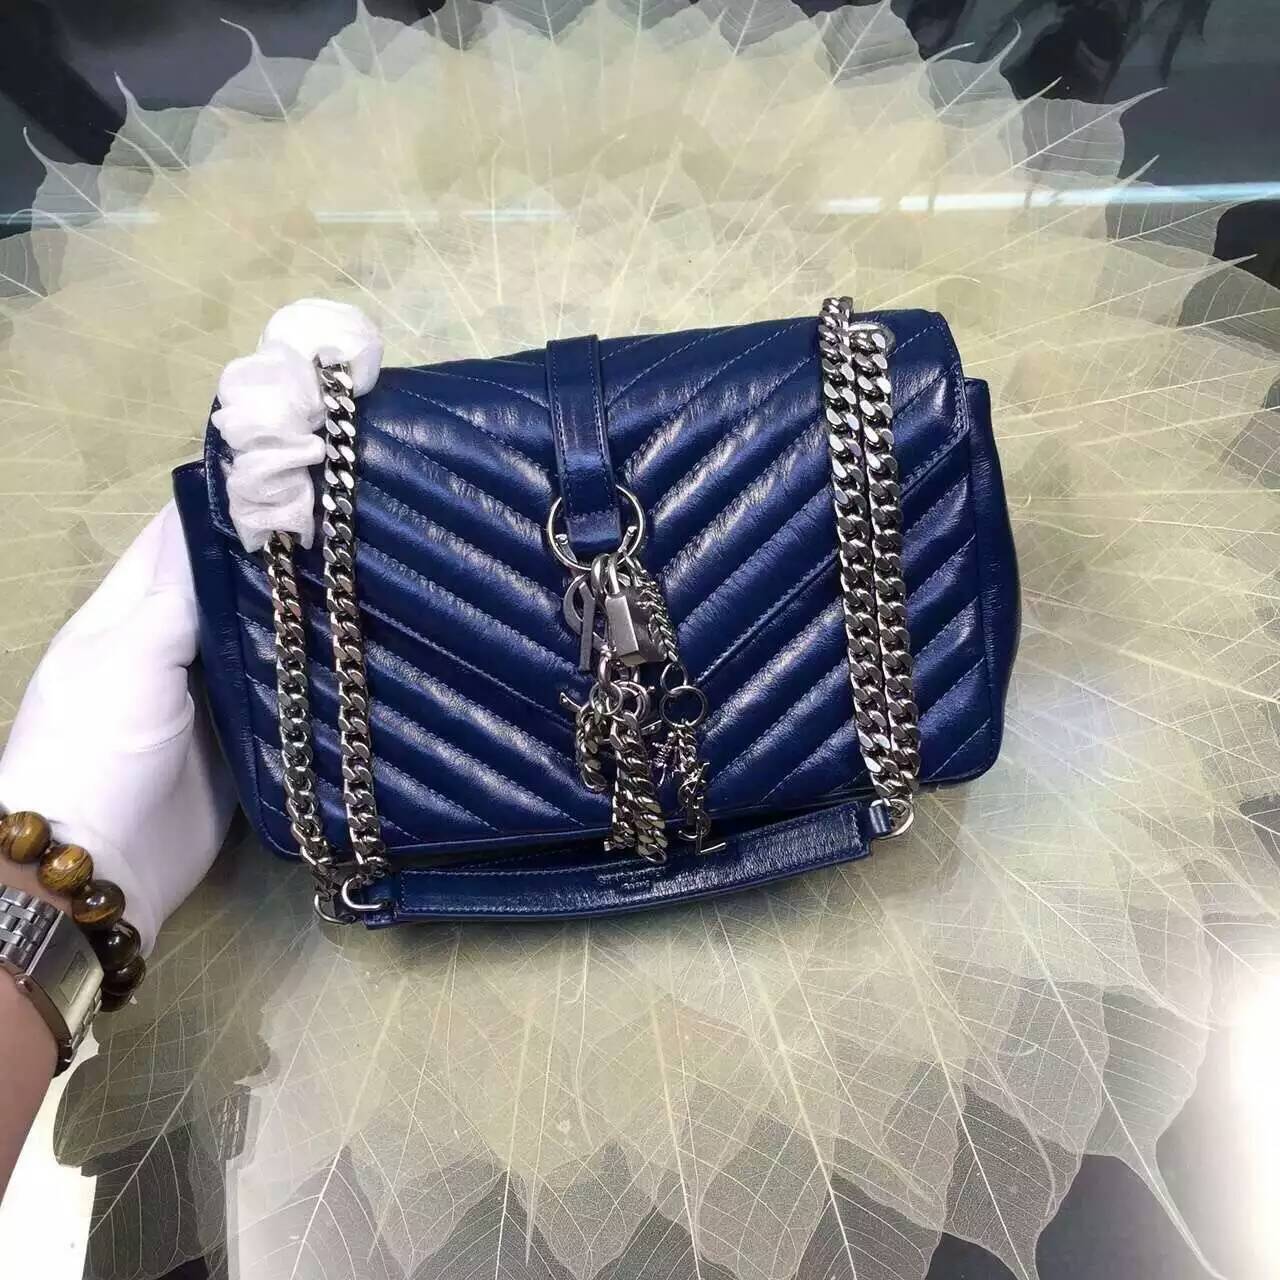 2016 Cheap YSL Out Sale with Free Shipping-Saint Laurent Classic Medium Baby Monogram Satchel in Blue Matelasse Leather Silver